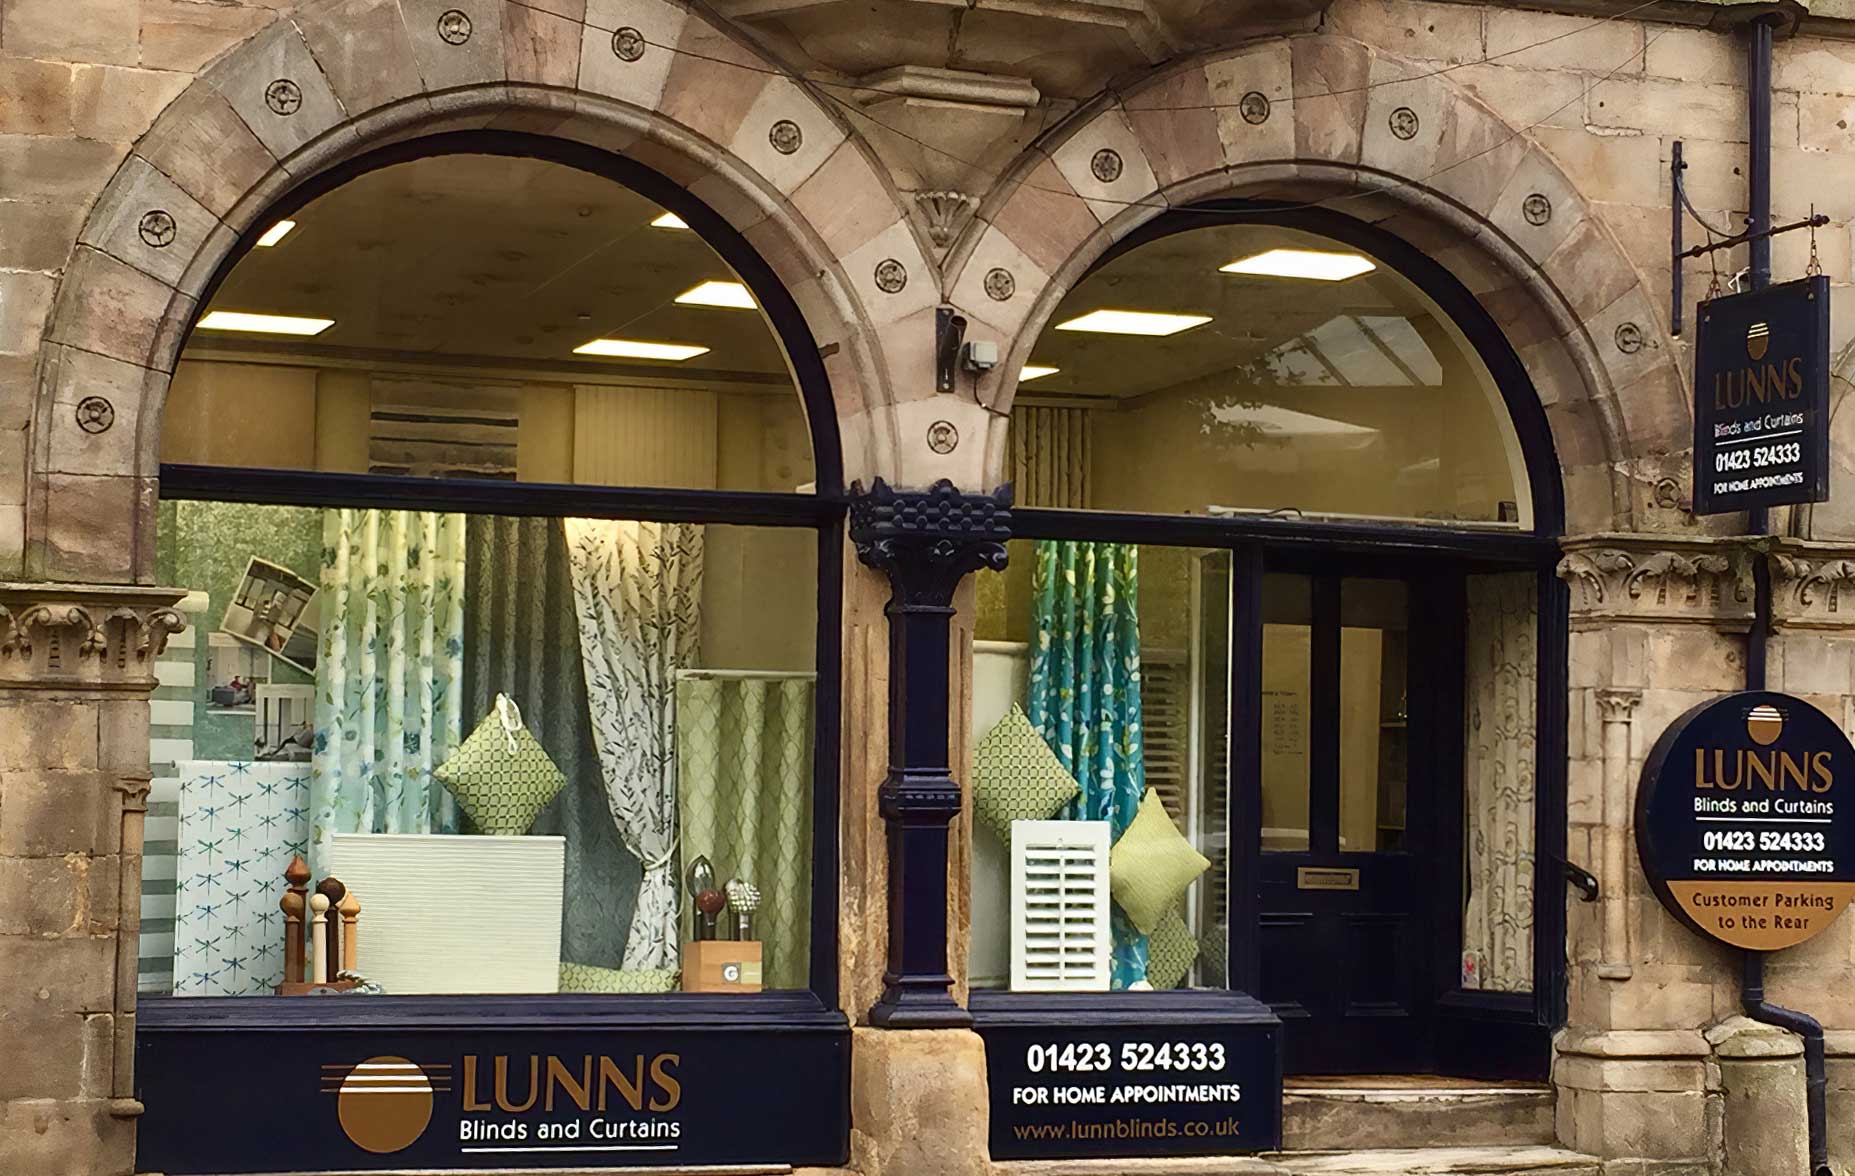 Contact Lunns Blinds